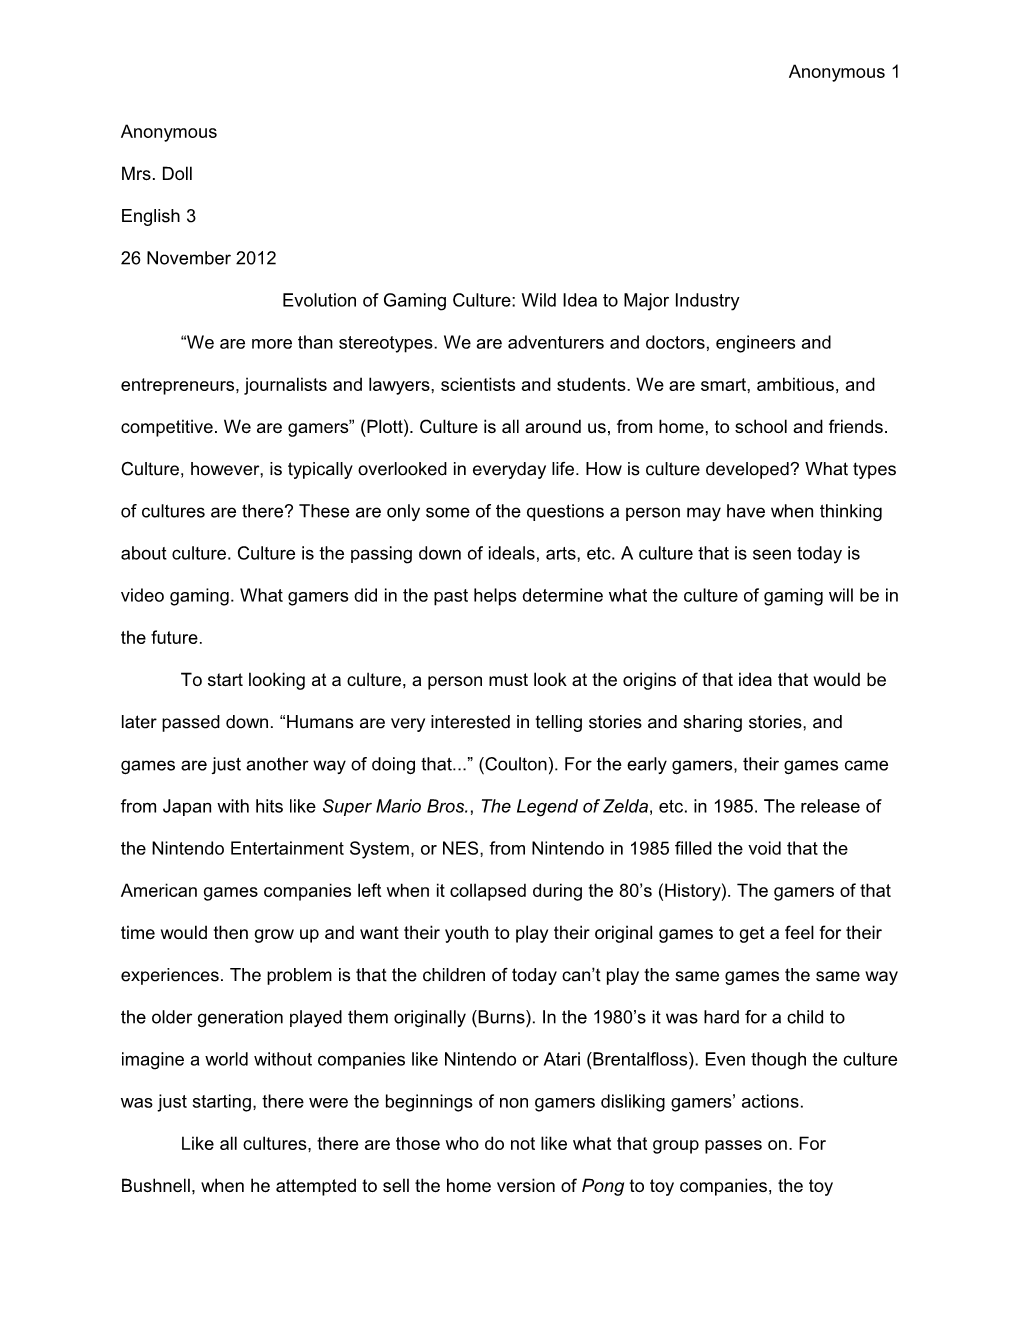 English Research Paper: Final